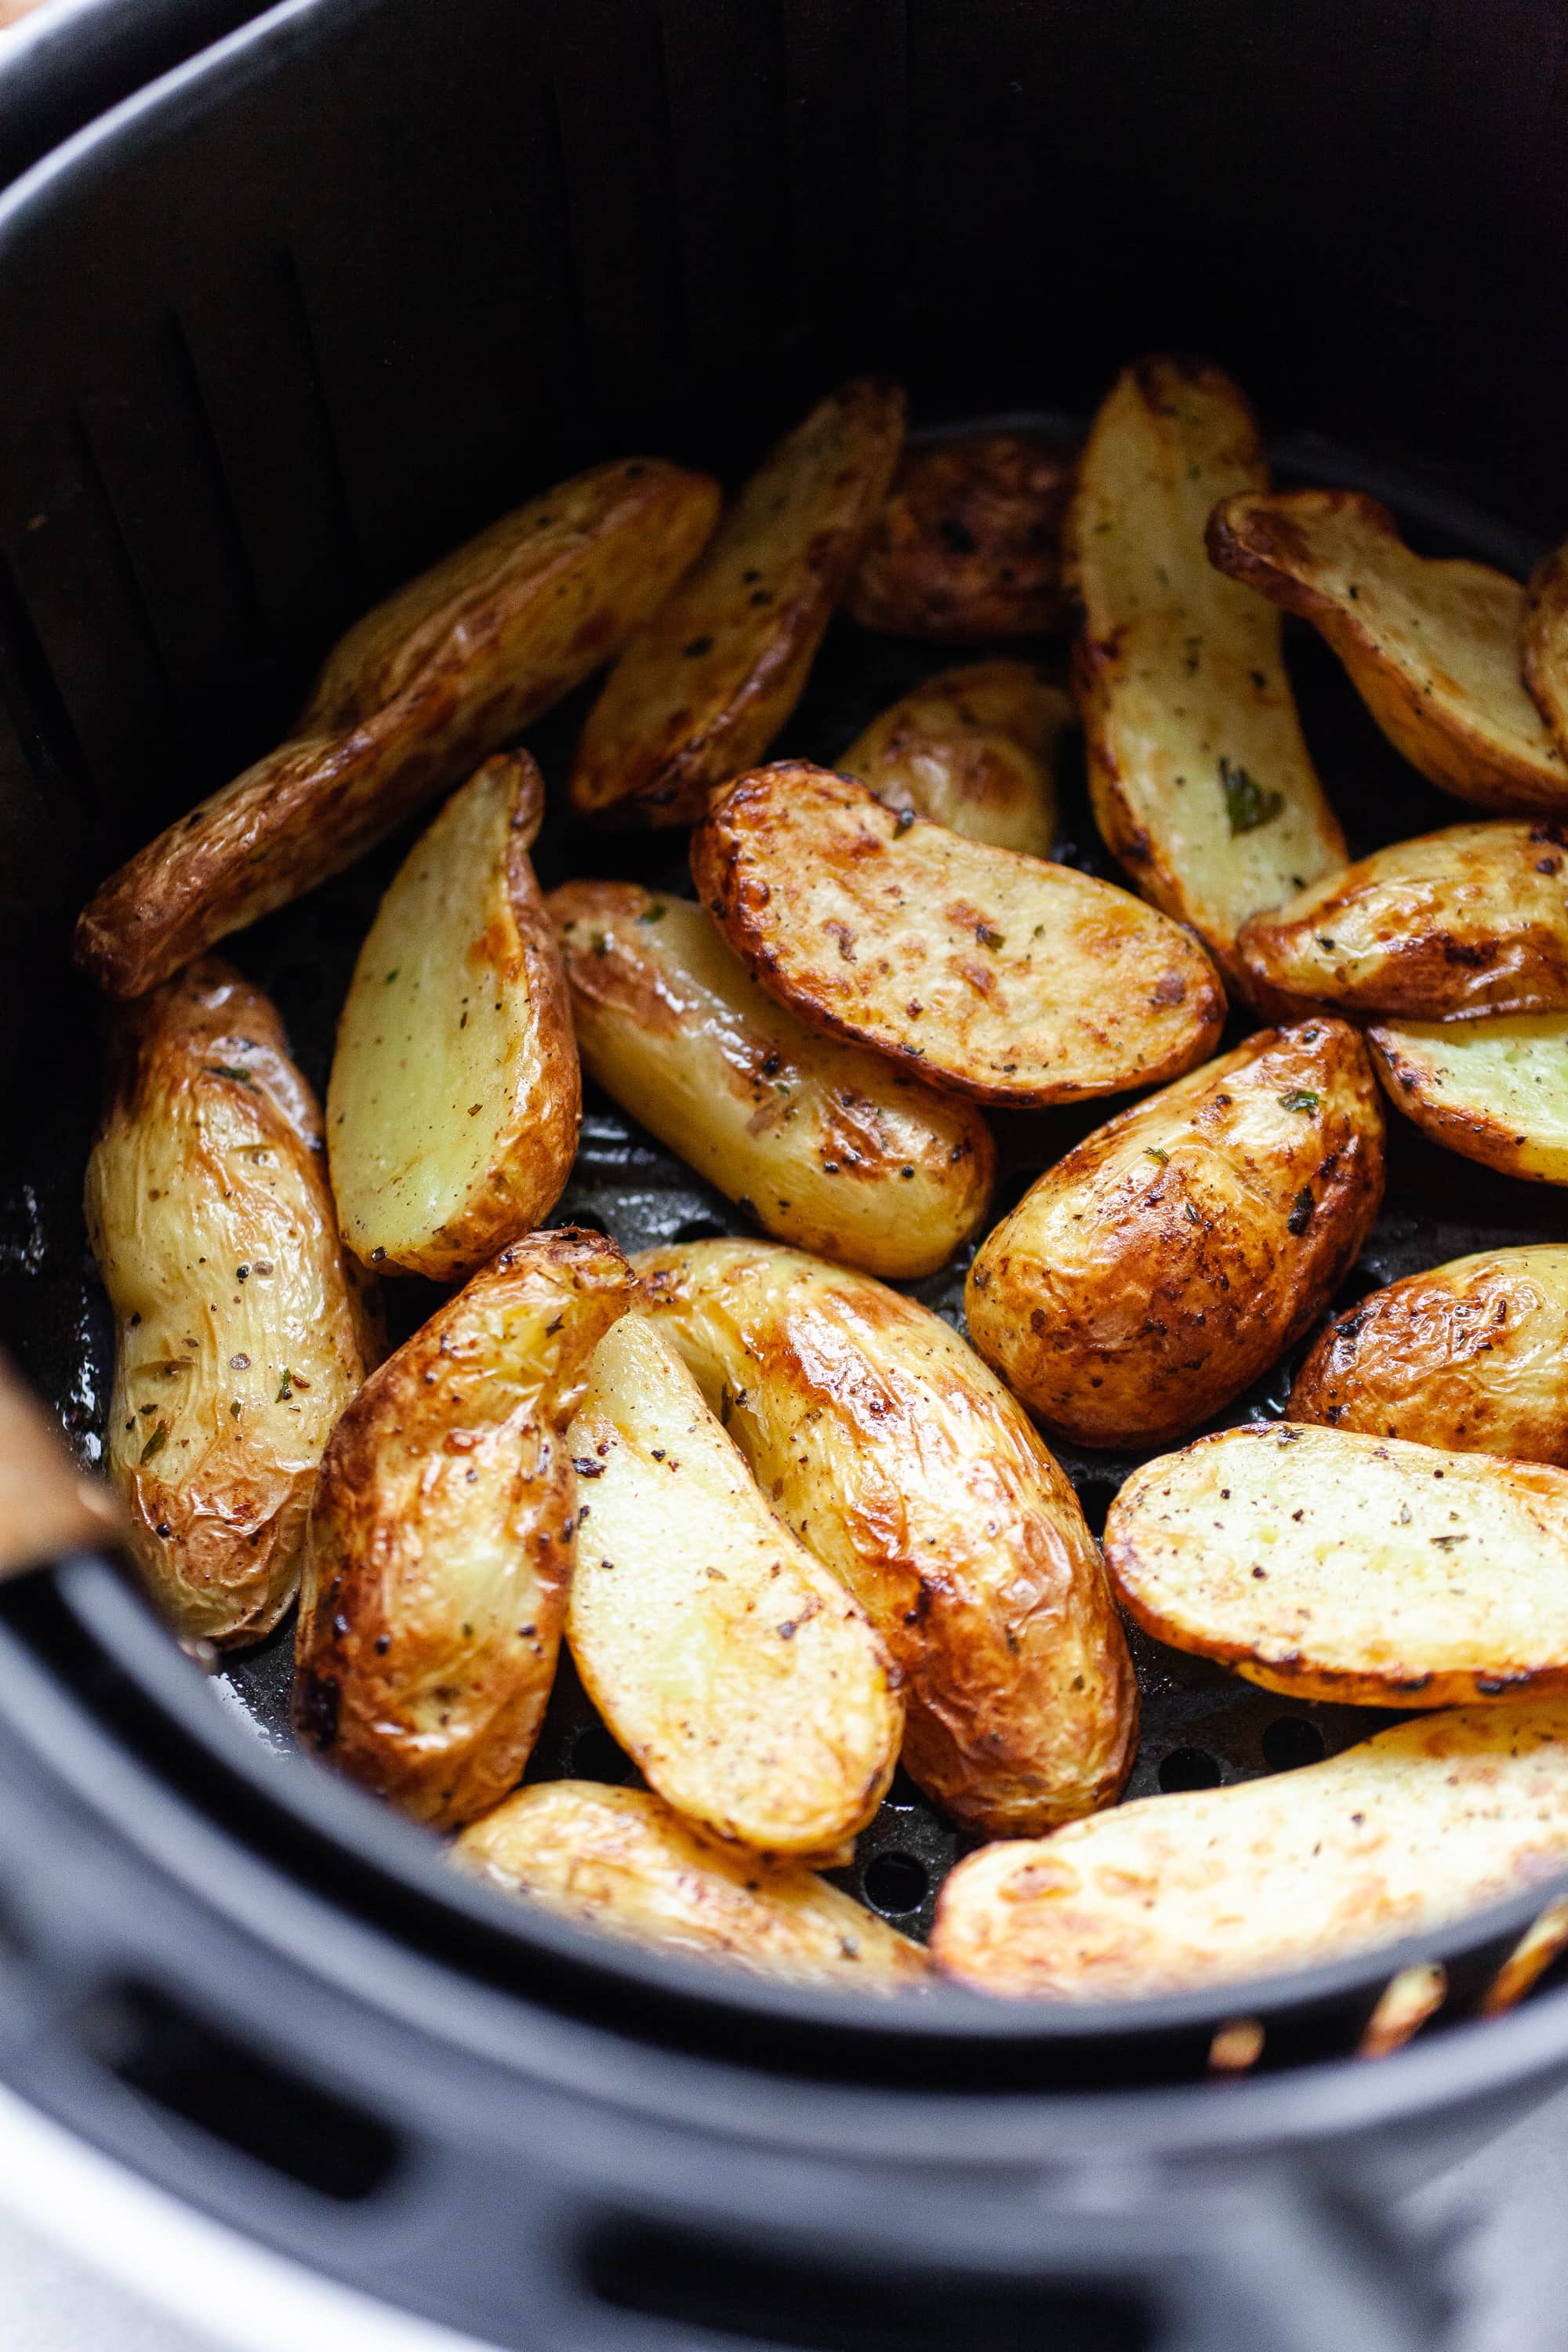 image of an Air Fryer basket filled with Fingerling Potatoes